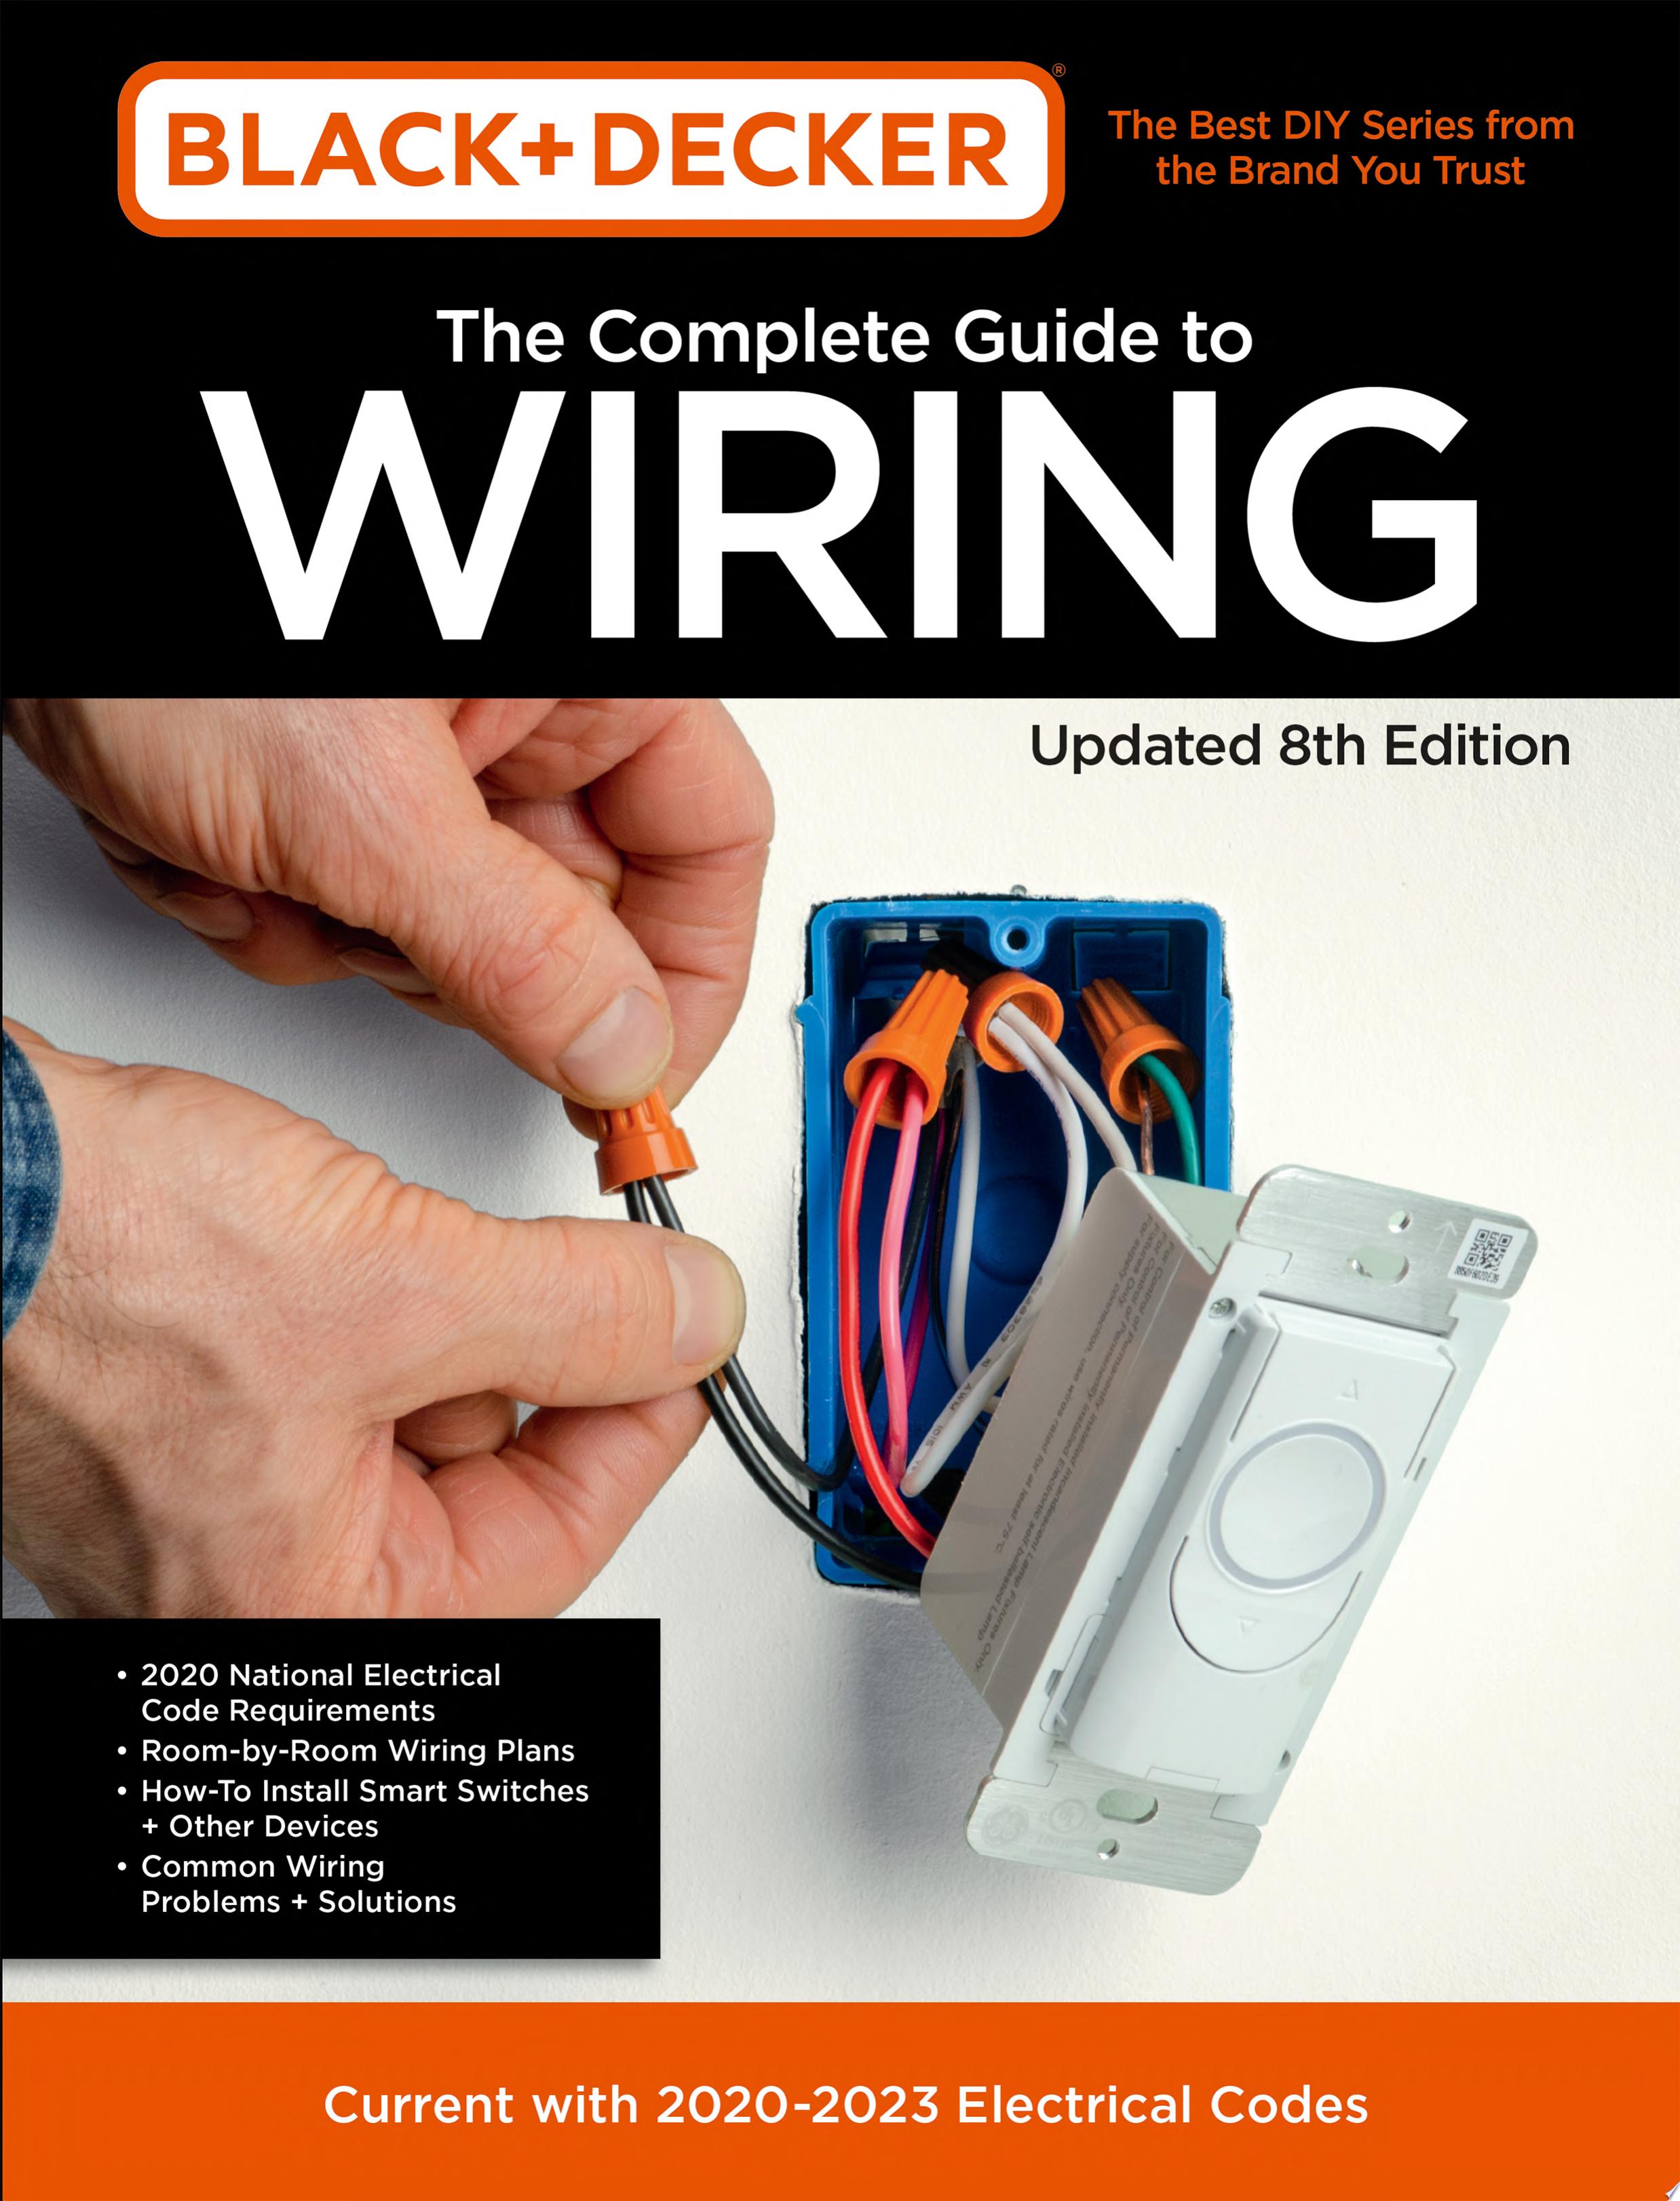 Image for "Black & Decker The Complete Guide to Wiring Updated 8th Edition"